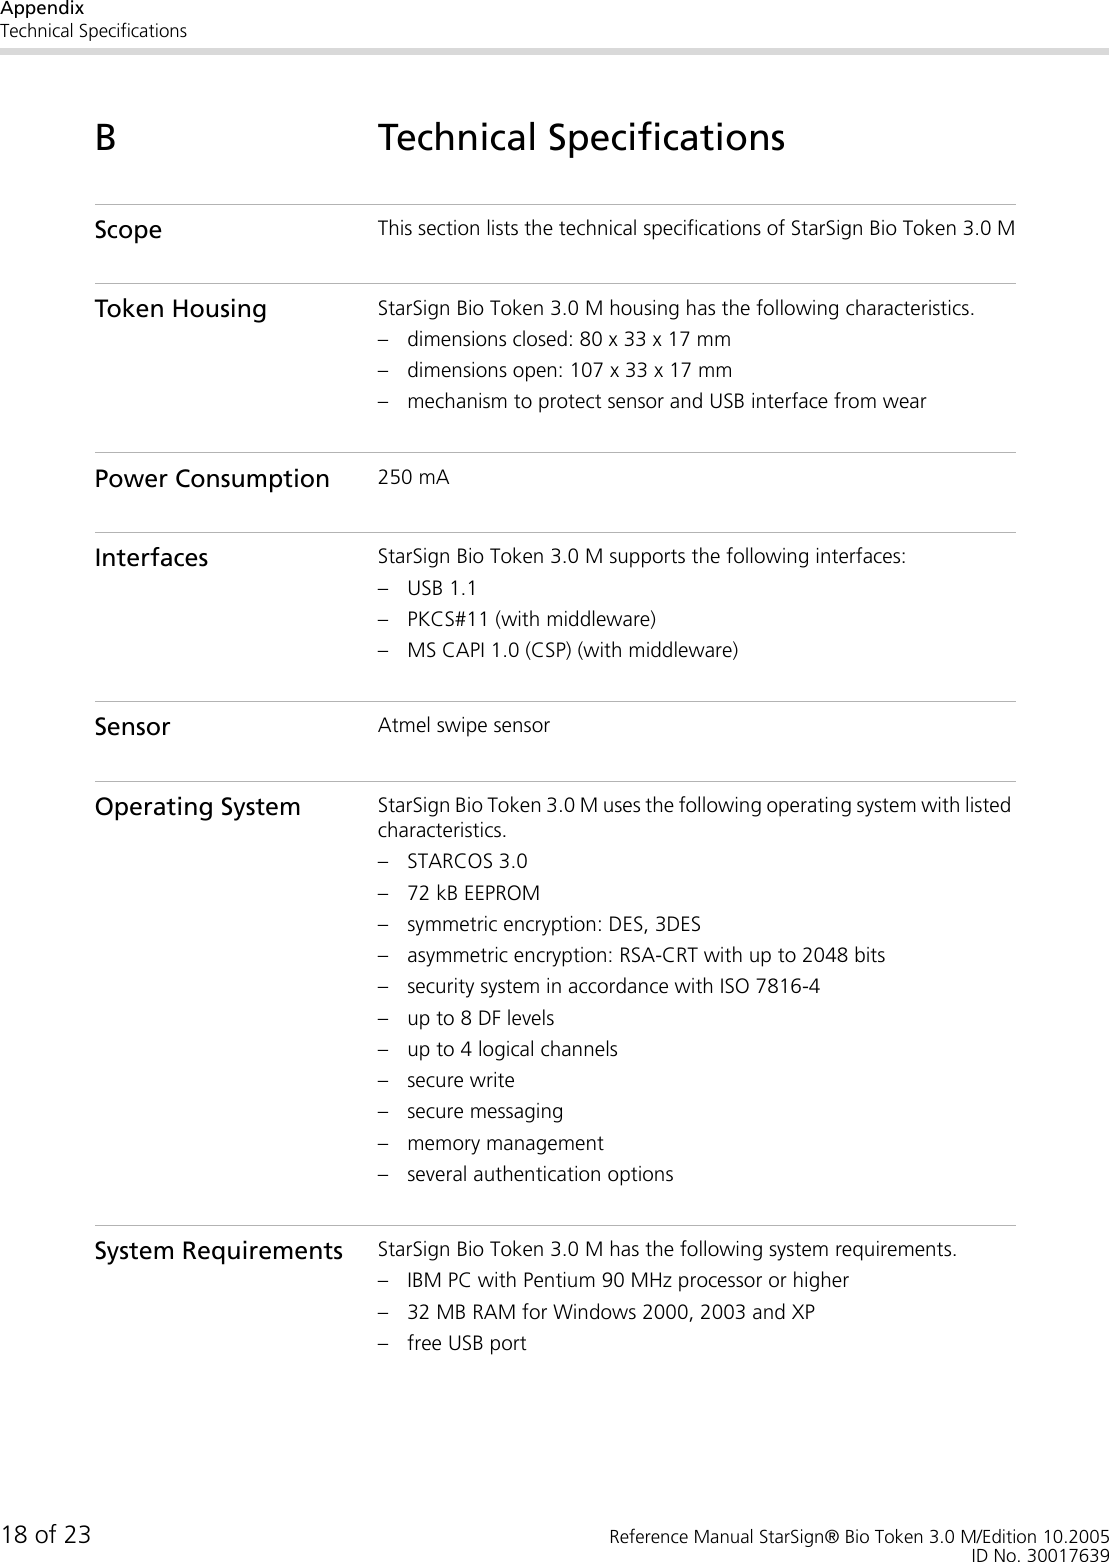 AppendixTechnical Specifications18 of 23 Reference Manual StarSign® Bio Token 3.0 M/Edition 10.2005ID No. 30017639B Technical SpecificationsScope This section lists the technical specifications of StarSign Bio Token 3.0 MToken Housing StarSign Bio Token 3.0 M housing has the following characteristics.– dimensions closed: 80 x 33 x 17 mm– dimensions open: 107 x 33 x 17 mm– mechanism to protect sensor and USB interface from wearPower Consumption 250 mAInterfaces StarSign Bio Token 3.0 M supports the following interfaces:– USB 1.1– PKCS#11 (with middleware)– MS CAPI 1.0 (CSP) (with middleware)Sensor Atmel swipe sensorOperating System StarSign Bio Token 3.0 M uses the following operating system with listed characteristics.– STARCOS 3.0– 72 kB EEPROM– symmetric encryption: DES, 3DES– asymmetric encryption: RSA-CRT with up to 2048 bits– security system in accordance with ISO 7816-4– up to 8 DF levels– up to 4 logical channels– secure write– secure messaging– memory management– several authentication optionsSystem Requirements StarSign Bio Token 3.0 M has the following system requirements.– IBM PC with Pentium 90 MHz processor or higher– 32 MB RAM for Windows 2000, 2003 and XP– free USB port